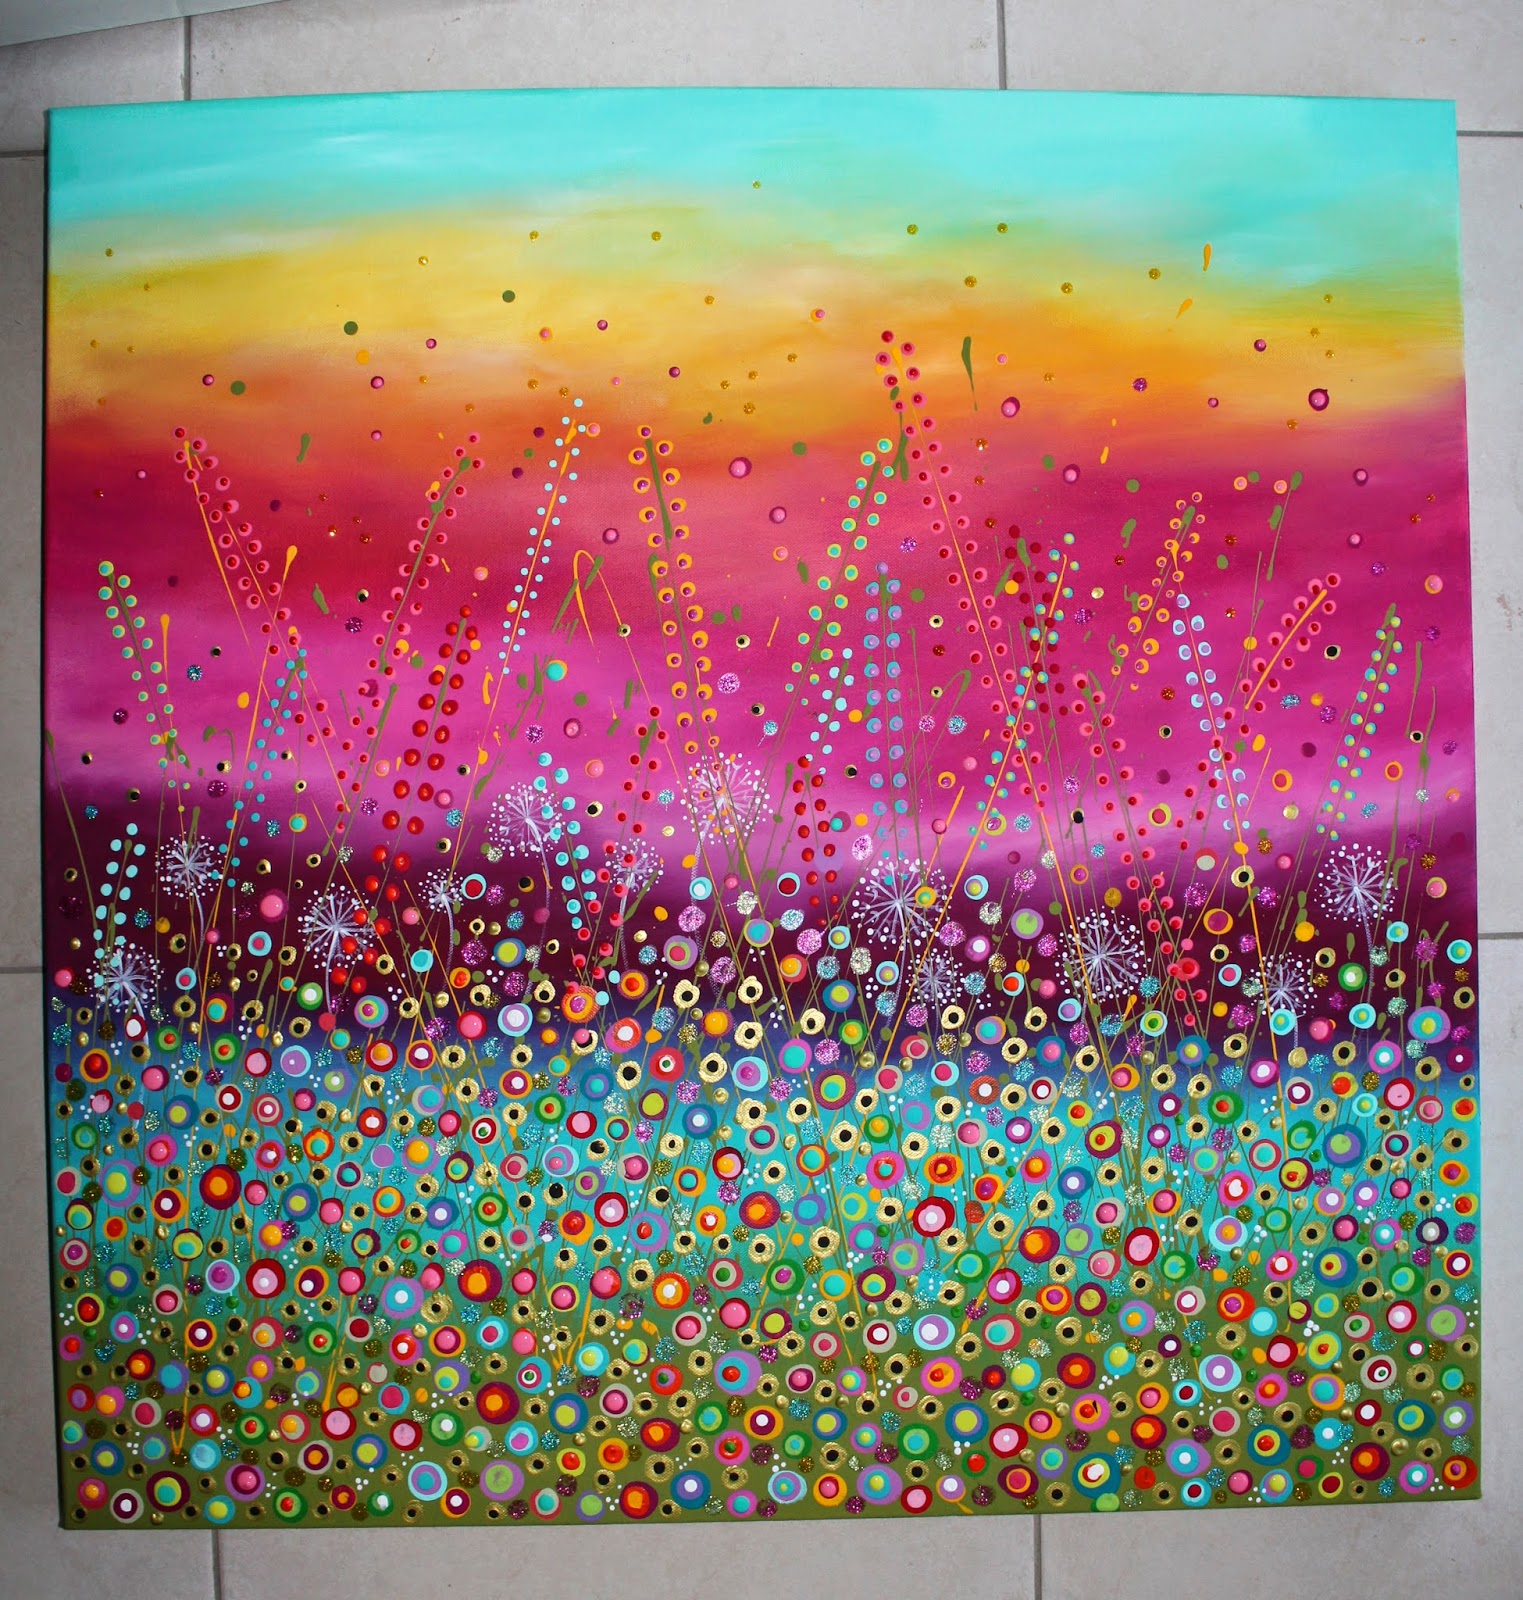 Made-By-Me....Julie Ryder: New! Vibrant Flower Meadow painting...